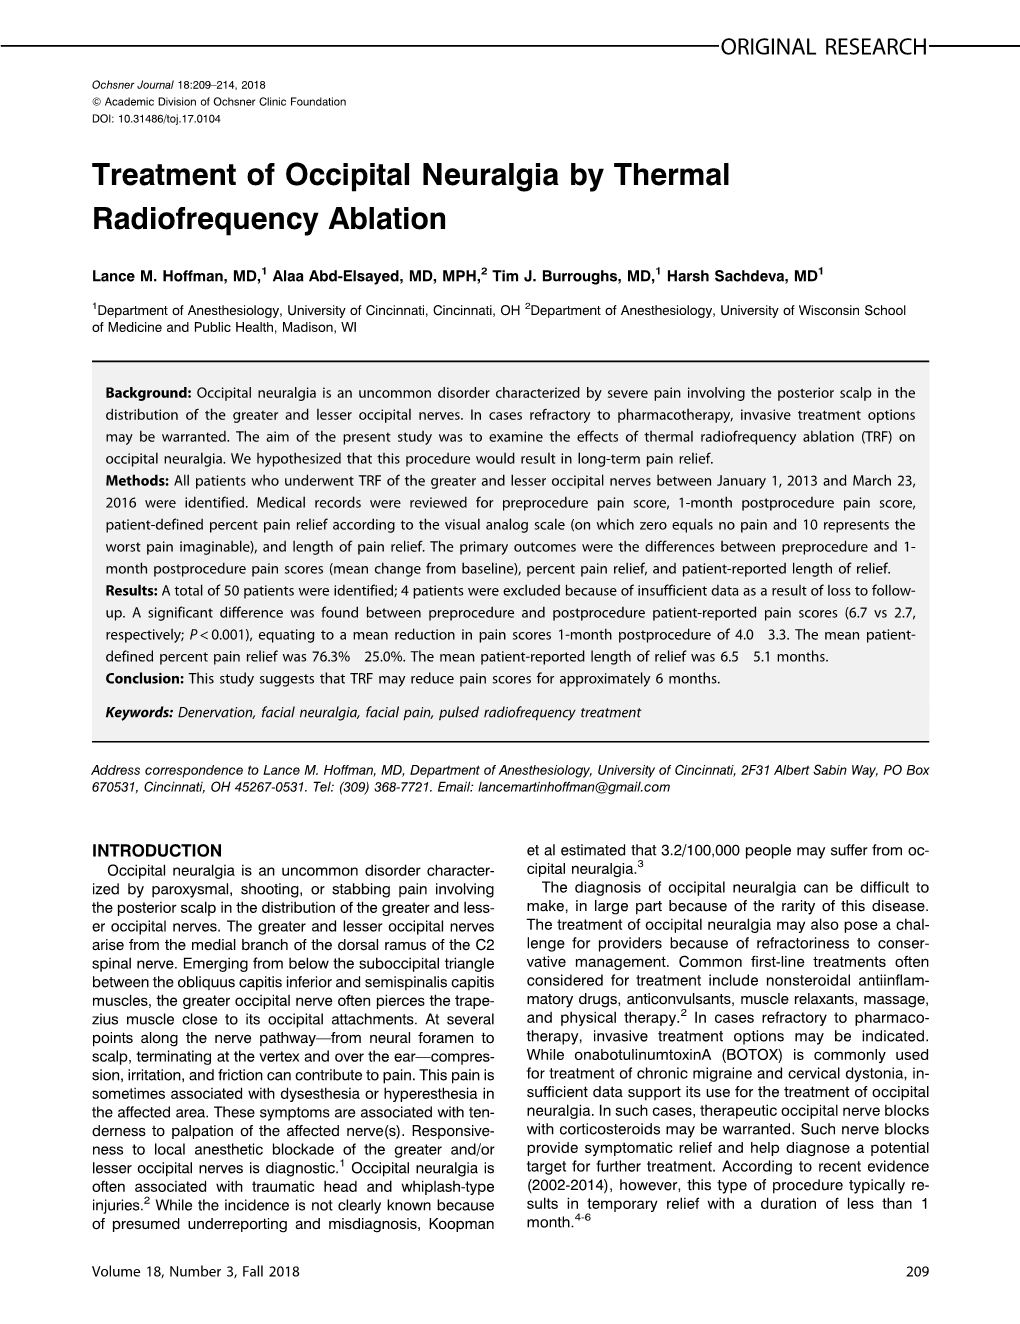 Treatment of Occipital Neuralgia by Thermal Radiofrequency Ablation